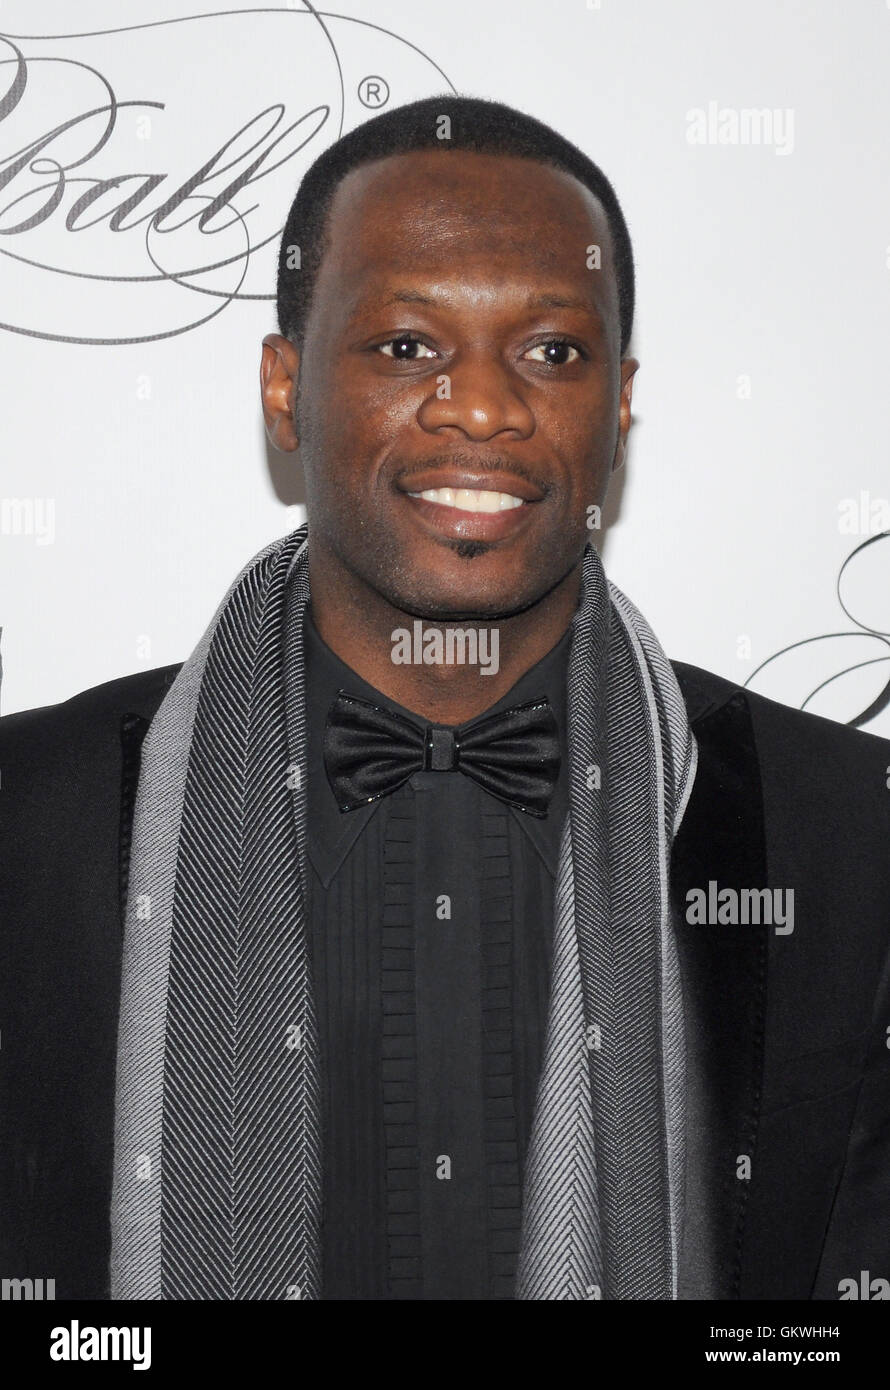 NEW YORK, NY - DECEMBER 06: Praskazrel Samuel Michel at Keep A Child Alive's Black Ball Redux 2012 at The Apollo Theater on December 6, 2012 in New York City. Credit: Edwin Garcia/MediaPunch Stock Photo